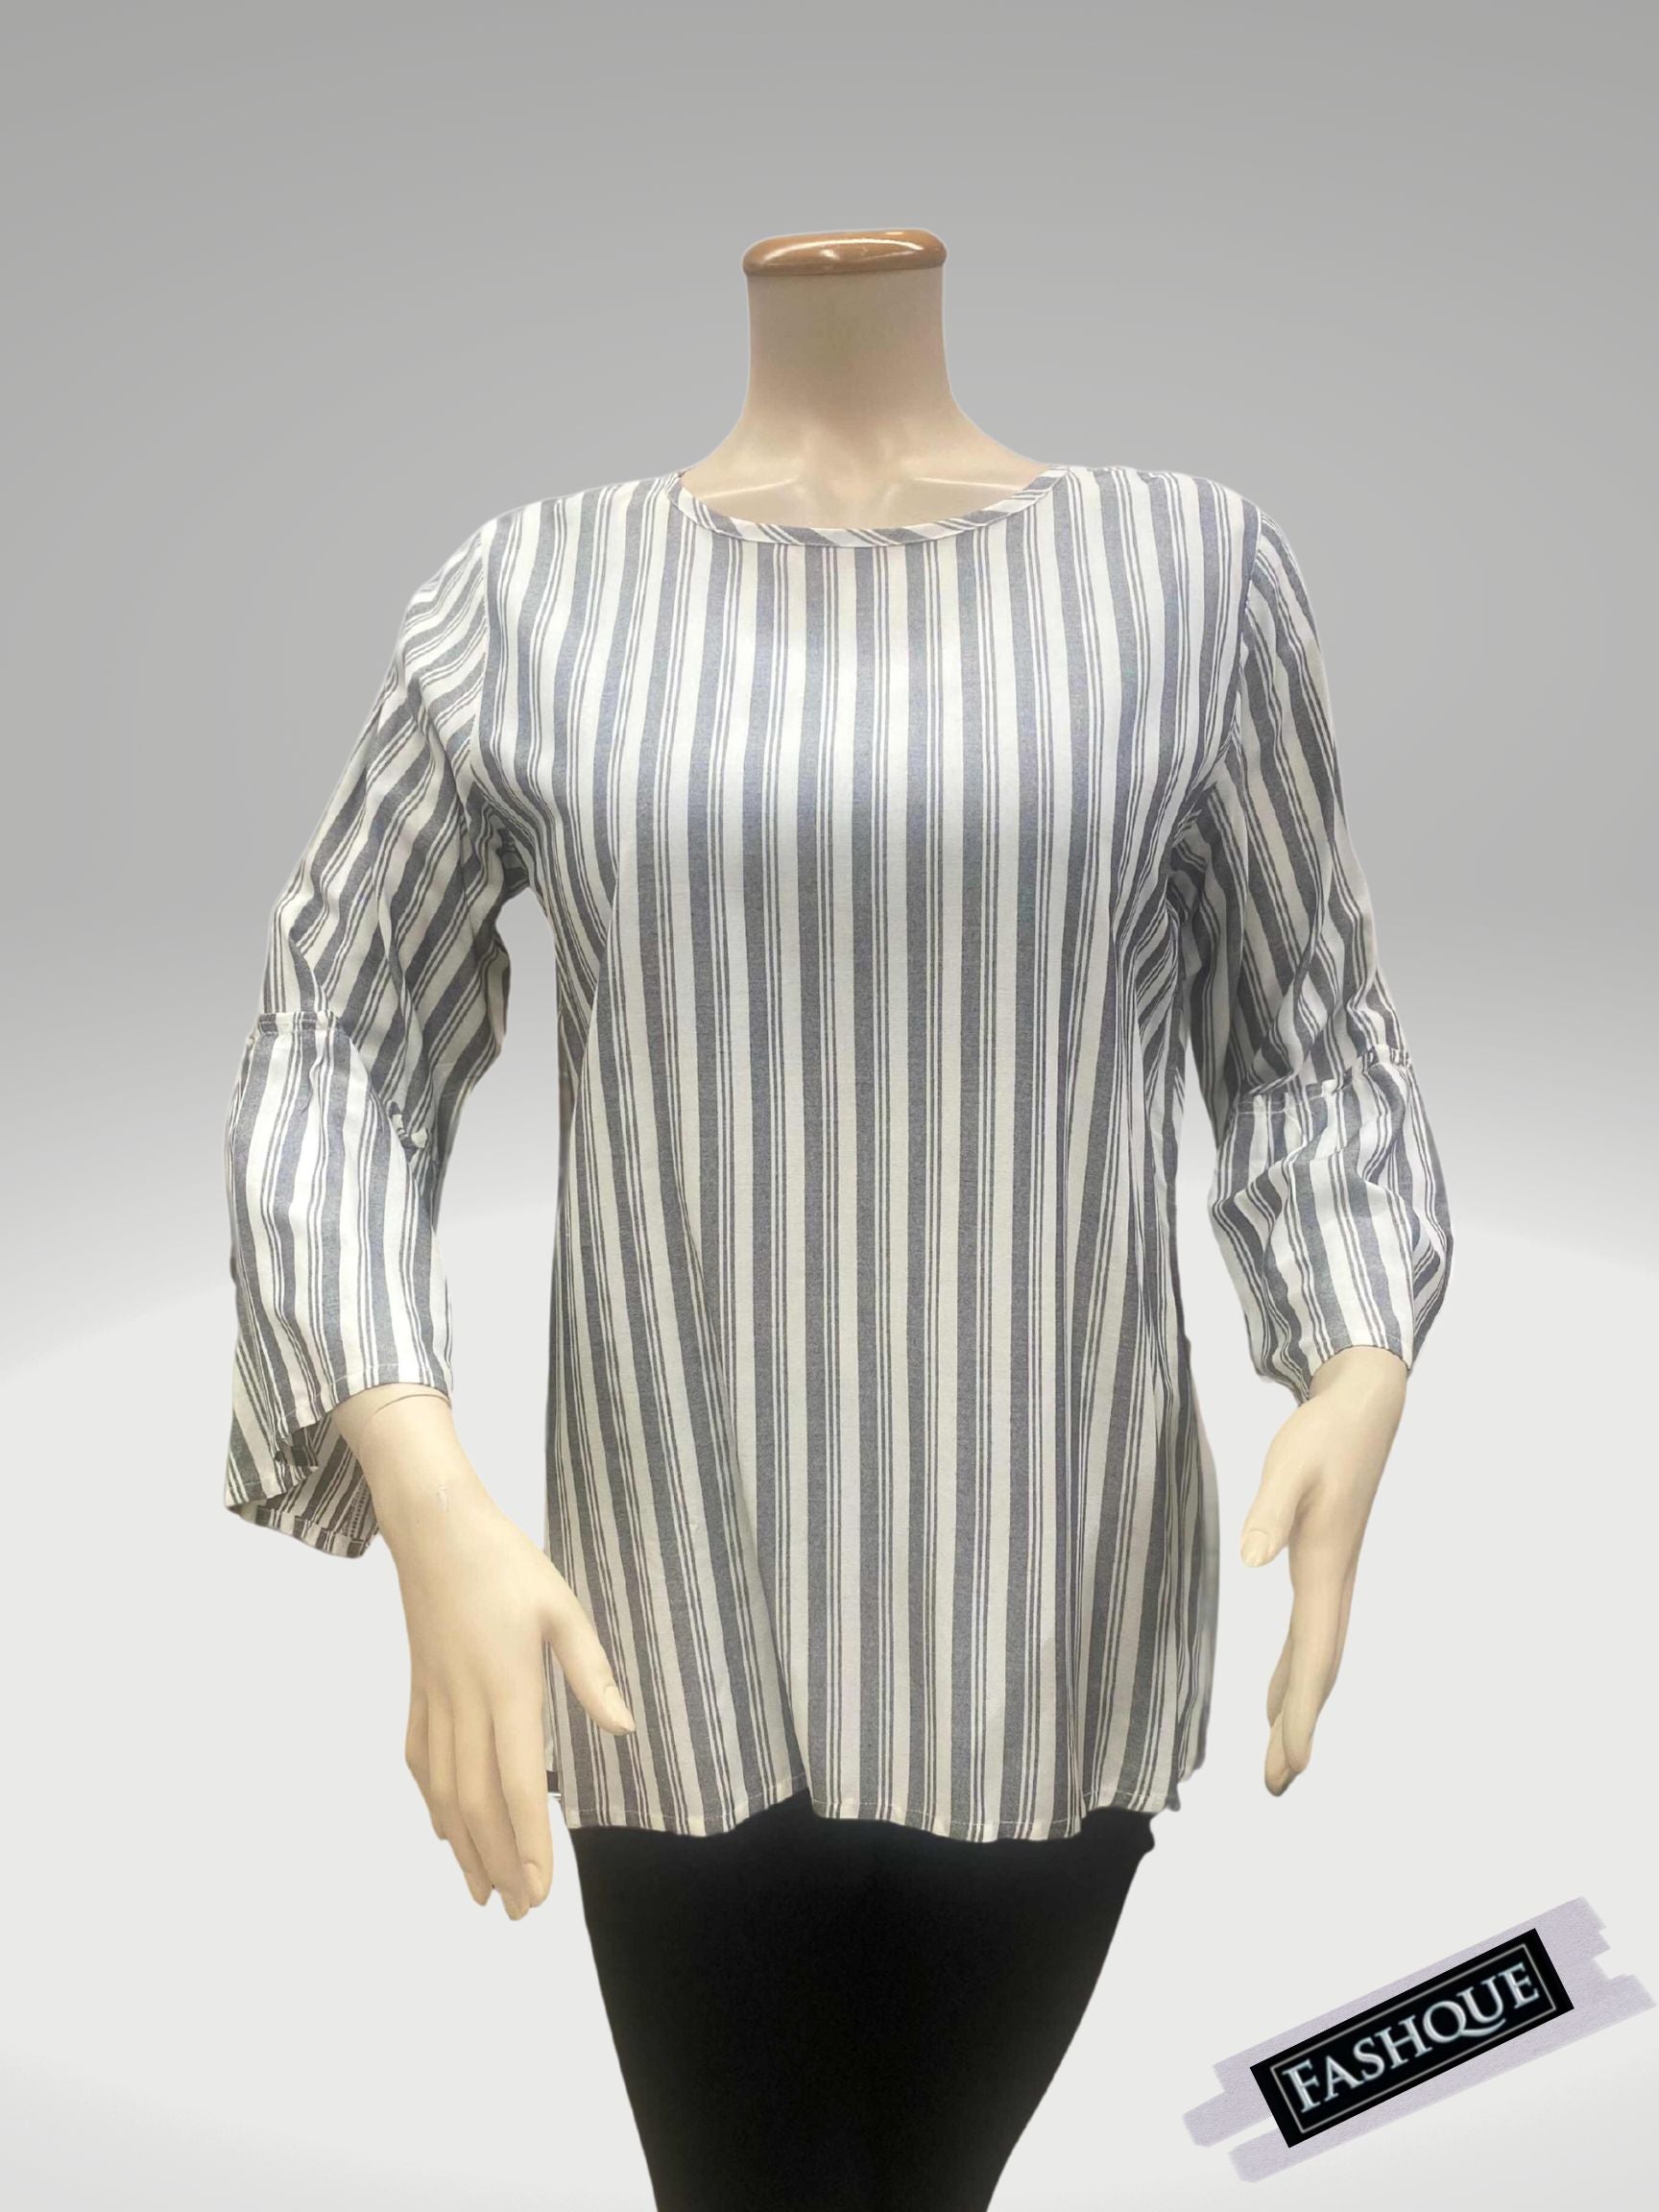 FASHQUE - BOAT NECK 3/4 Bell SLEEVE CHECKS TOP - T706